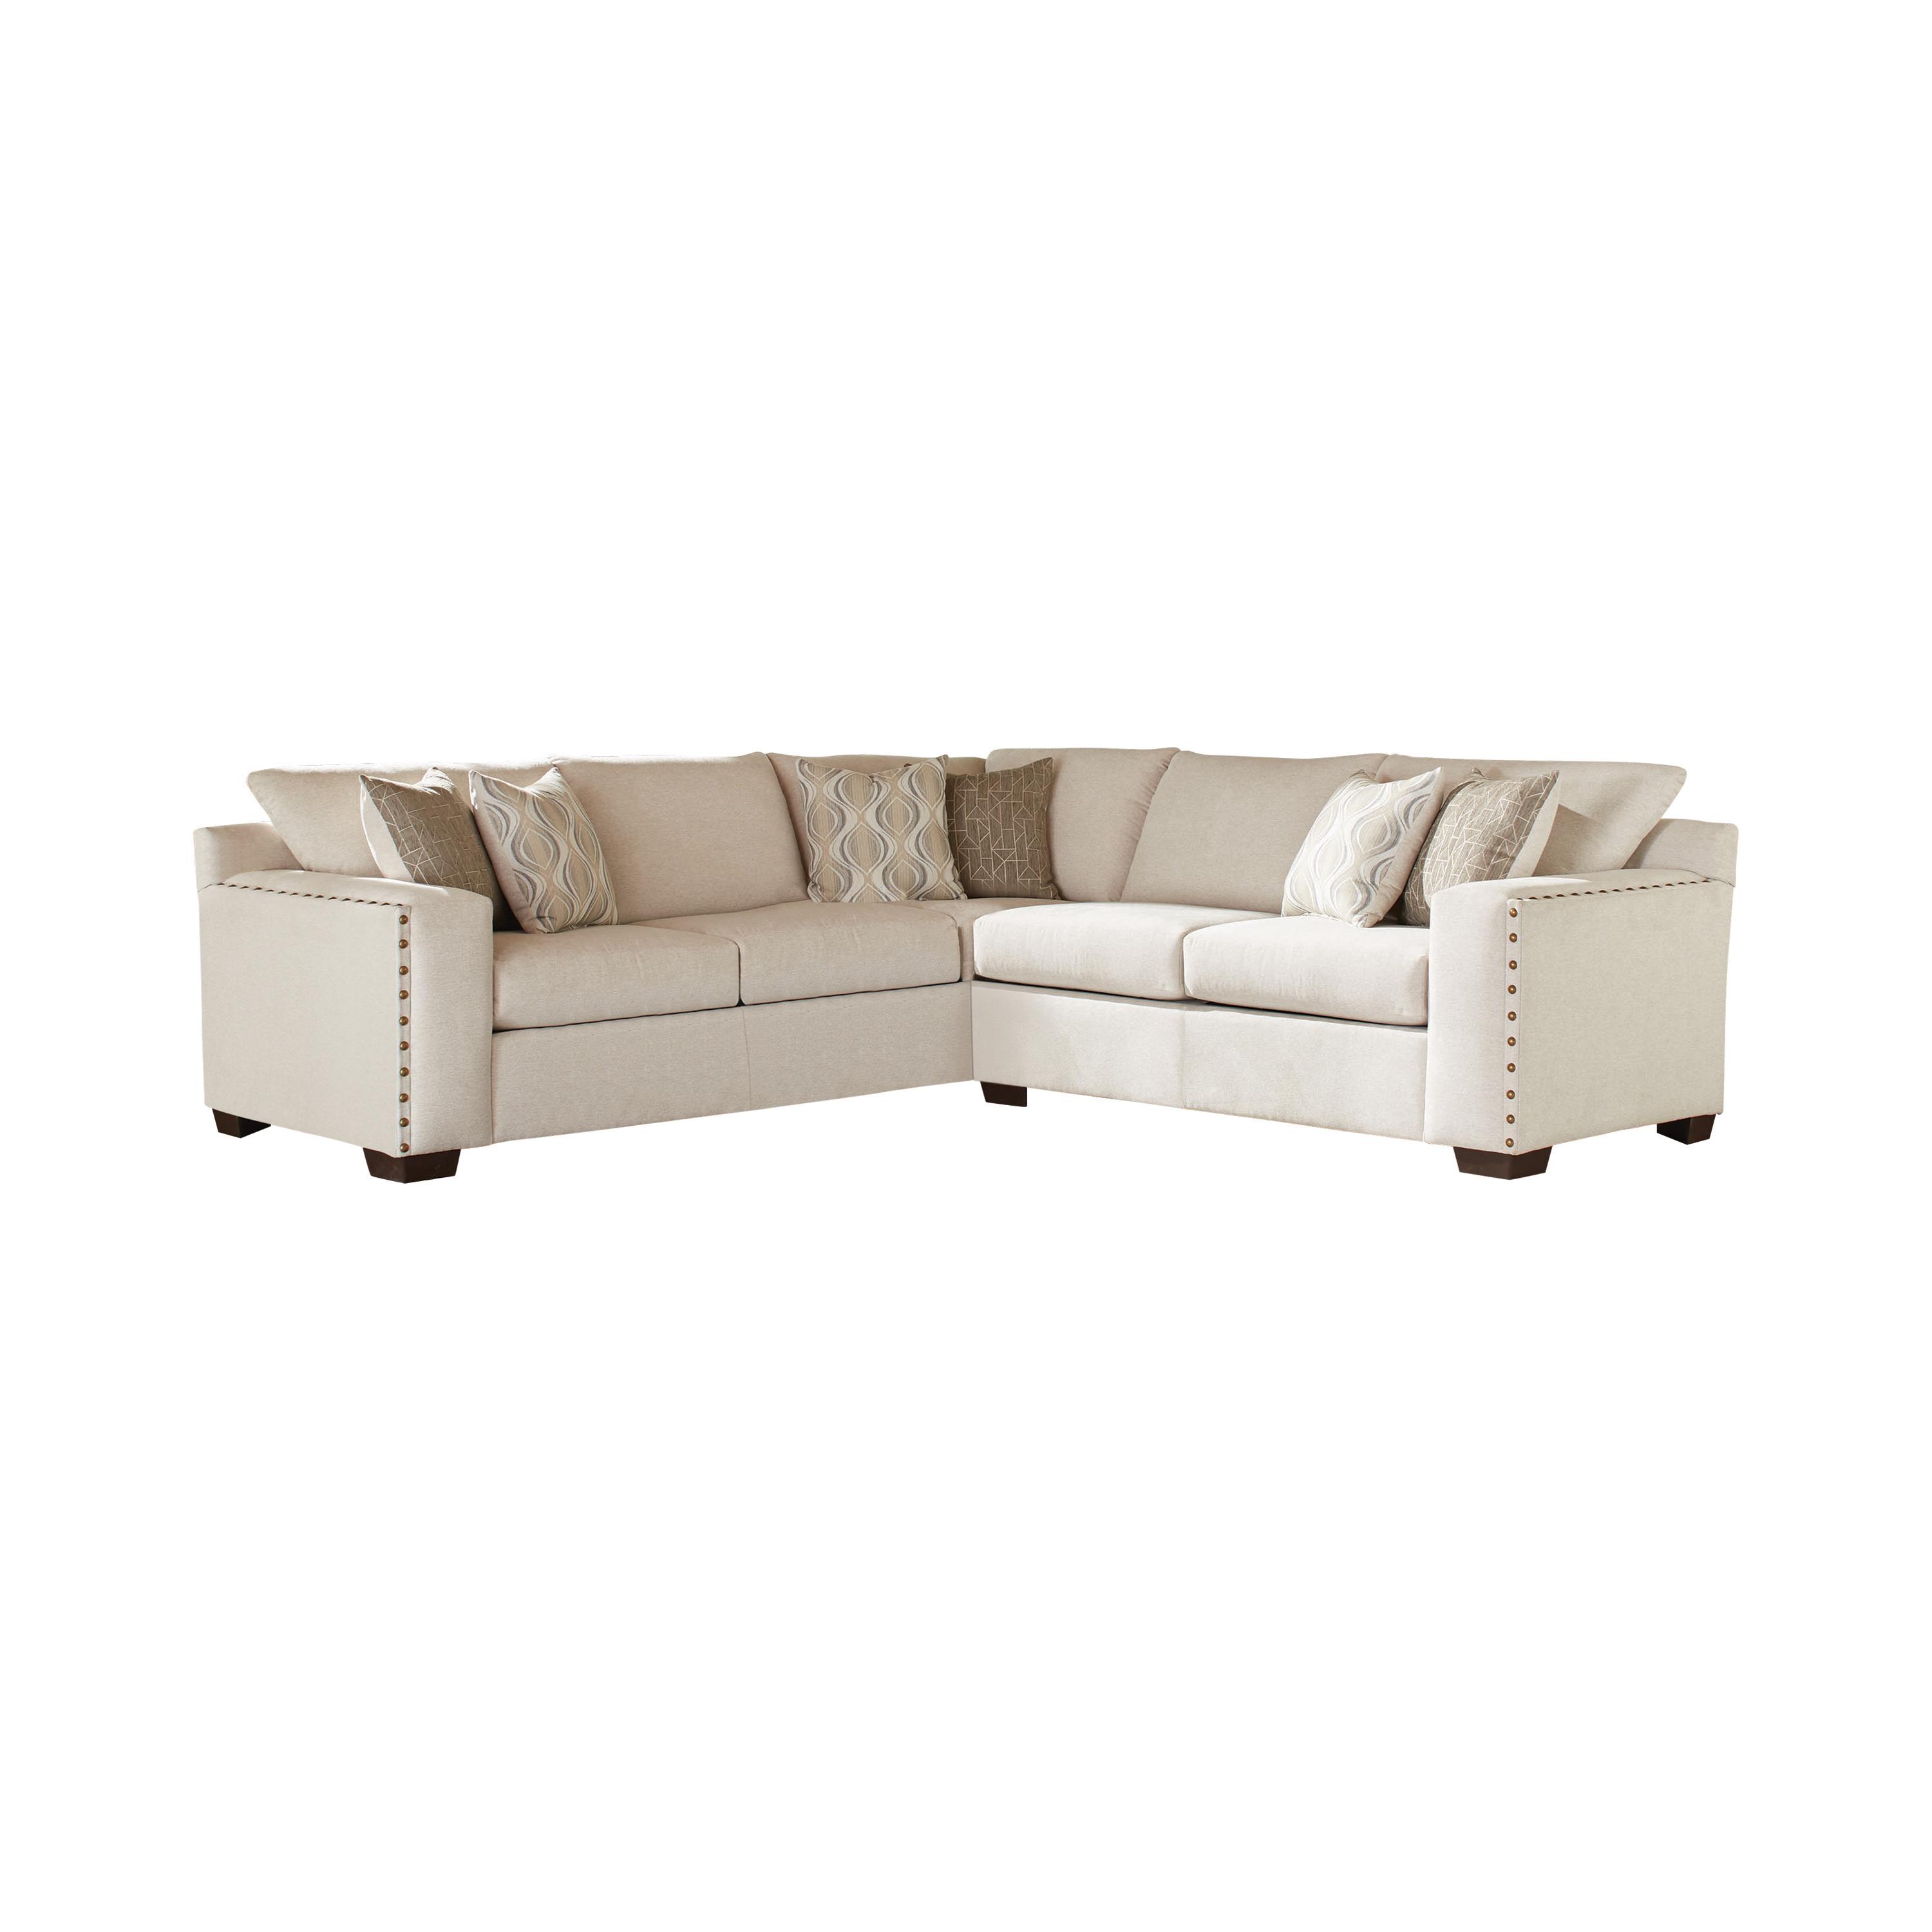 Modern Sectional 508610 Aria 508610 in Oatmeal Chenille